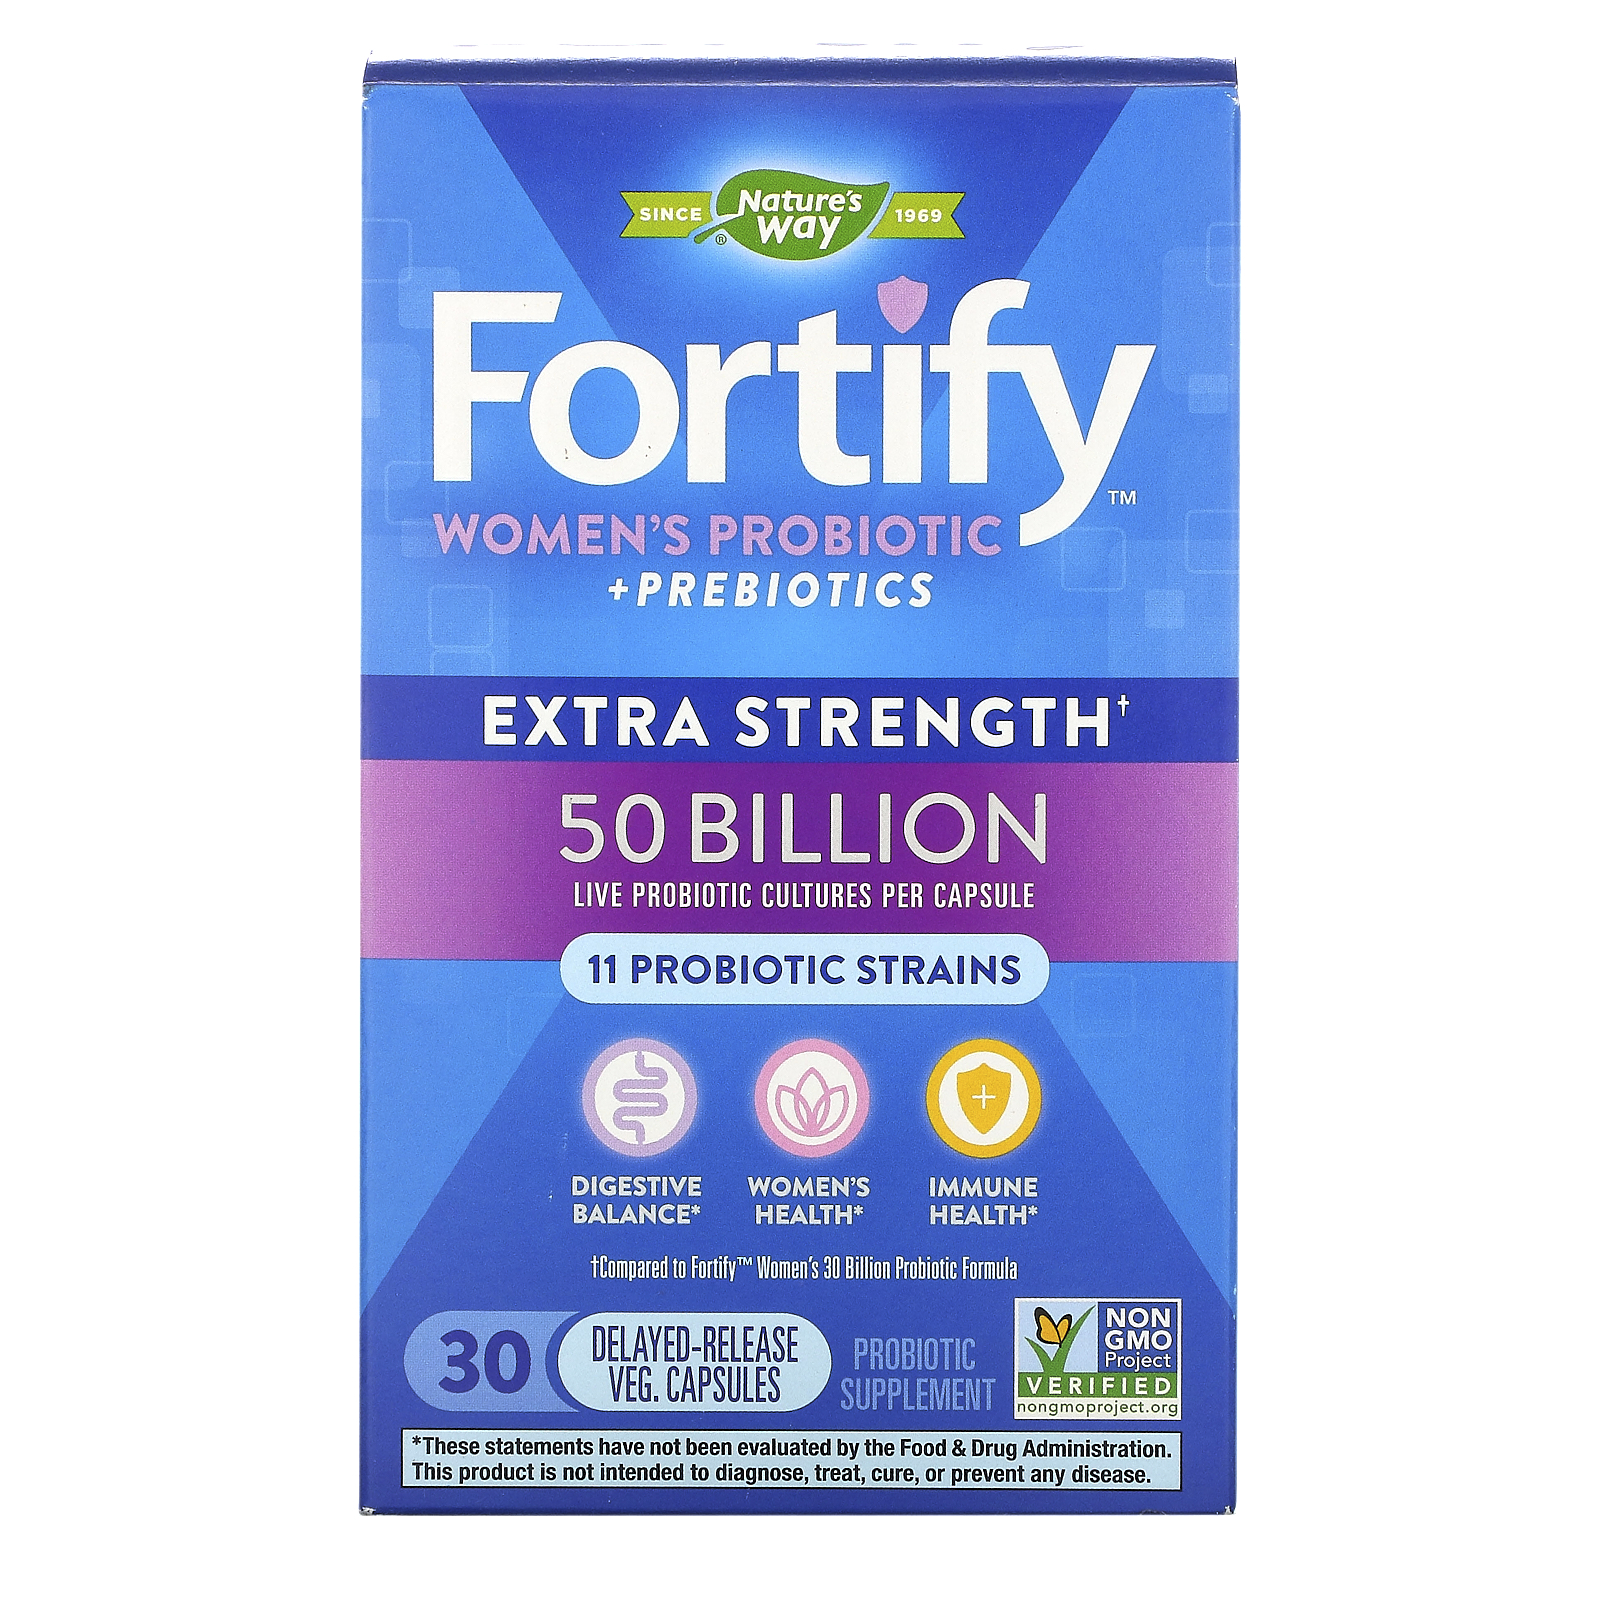 Natures Way Fortify Womens Probiotic Prebiotics Extra Strength